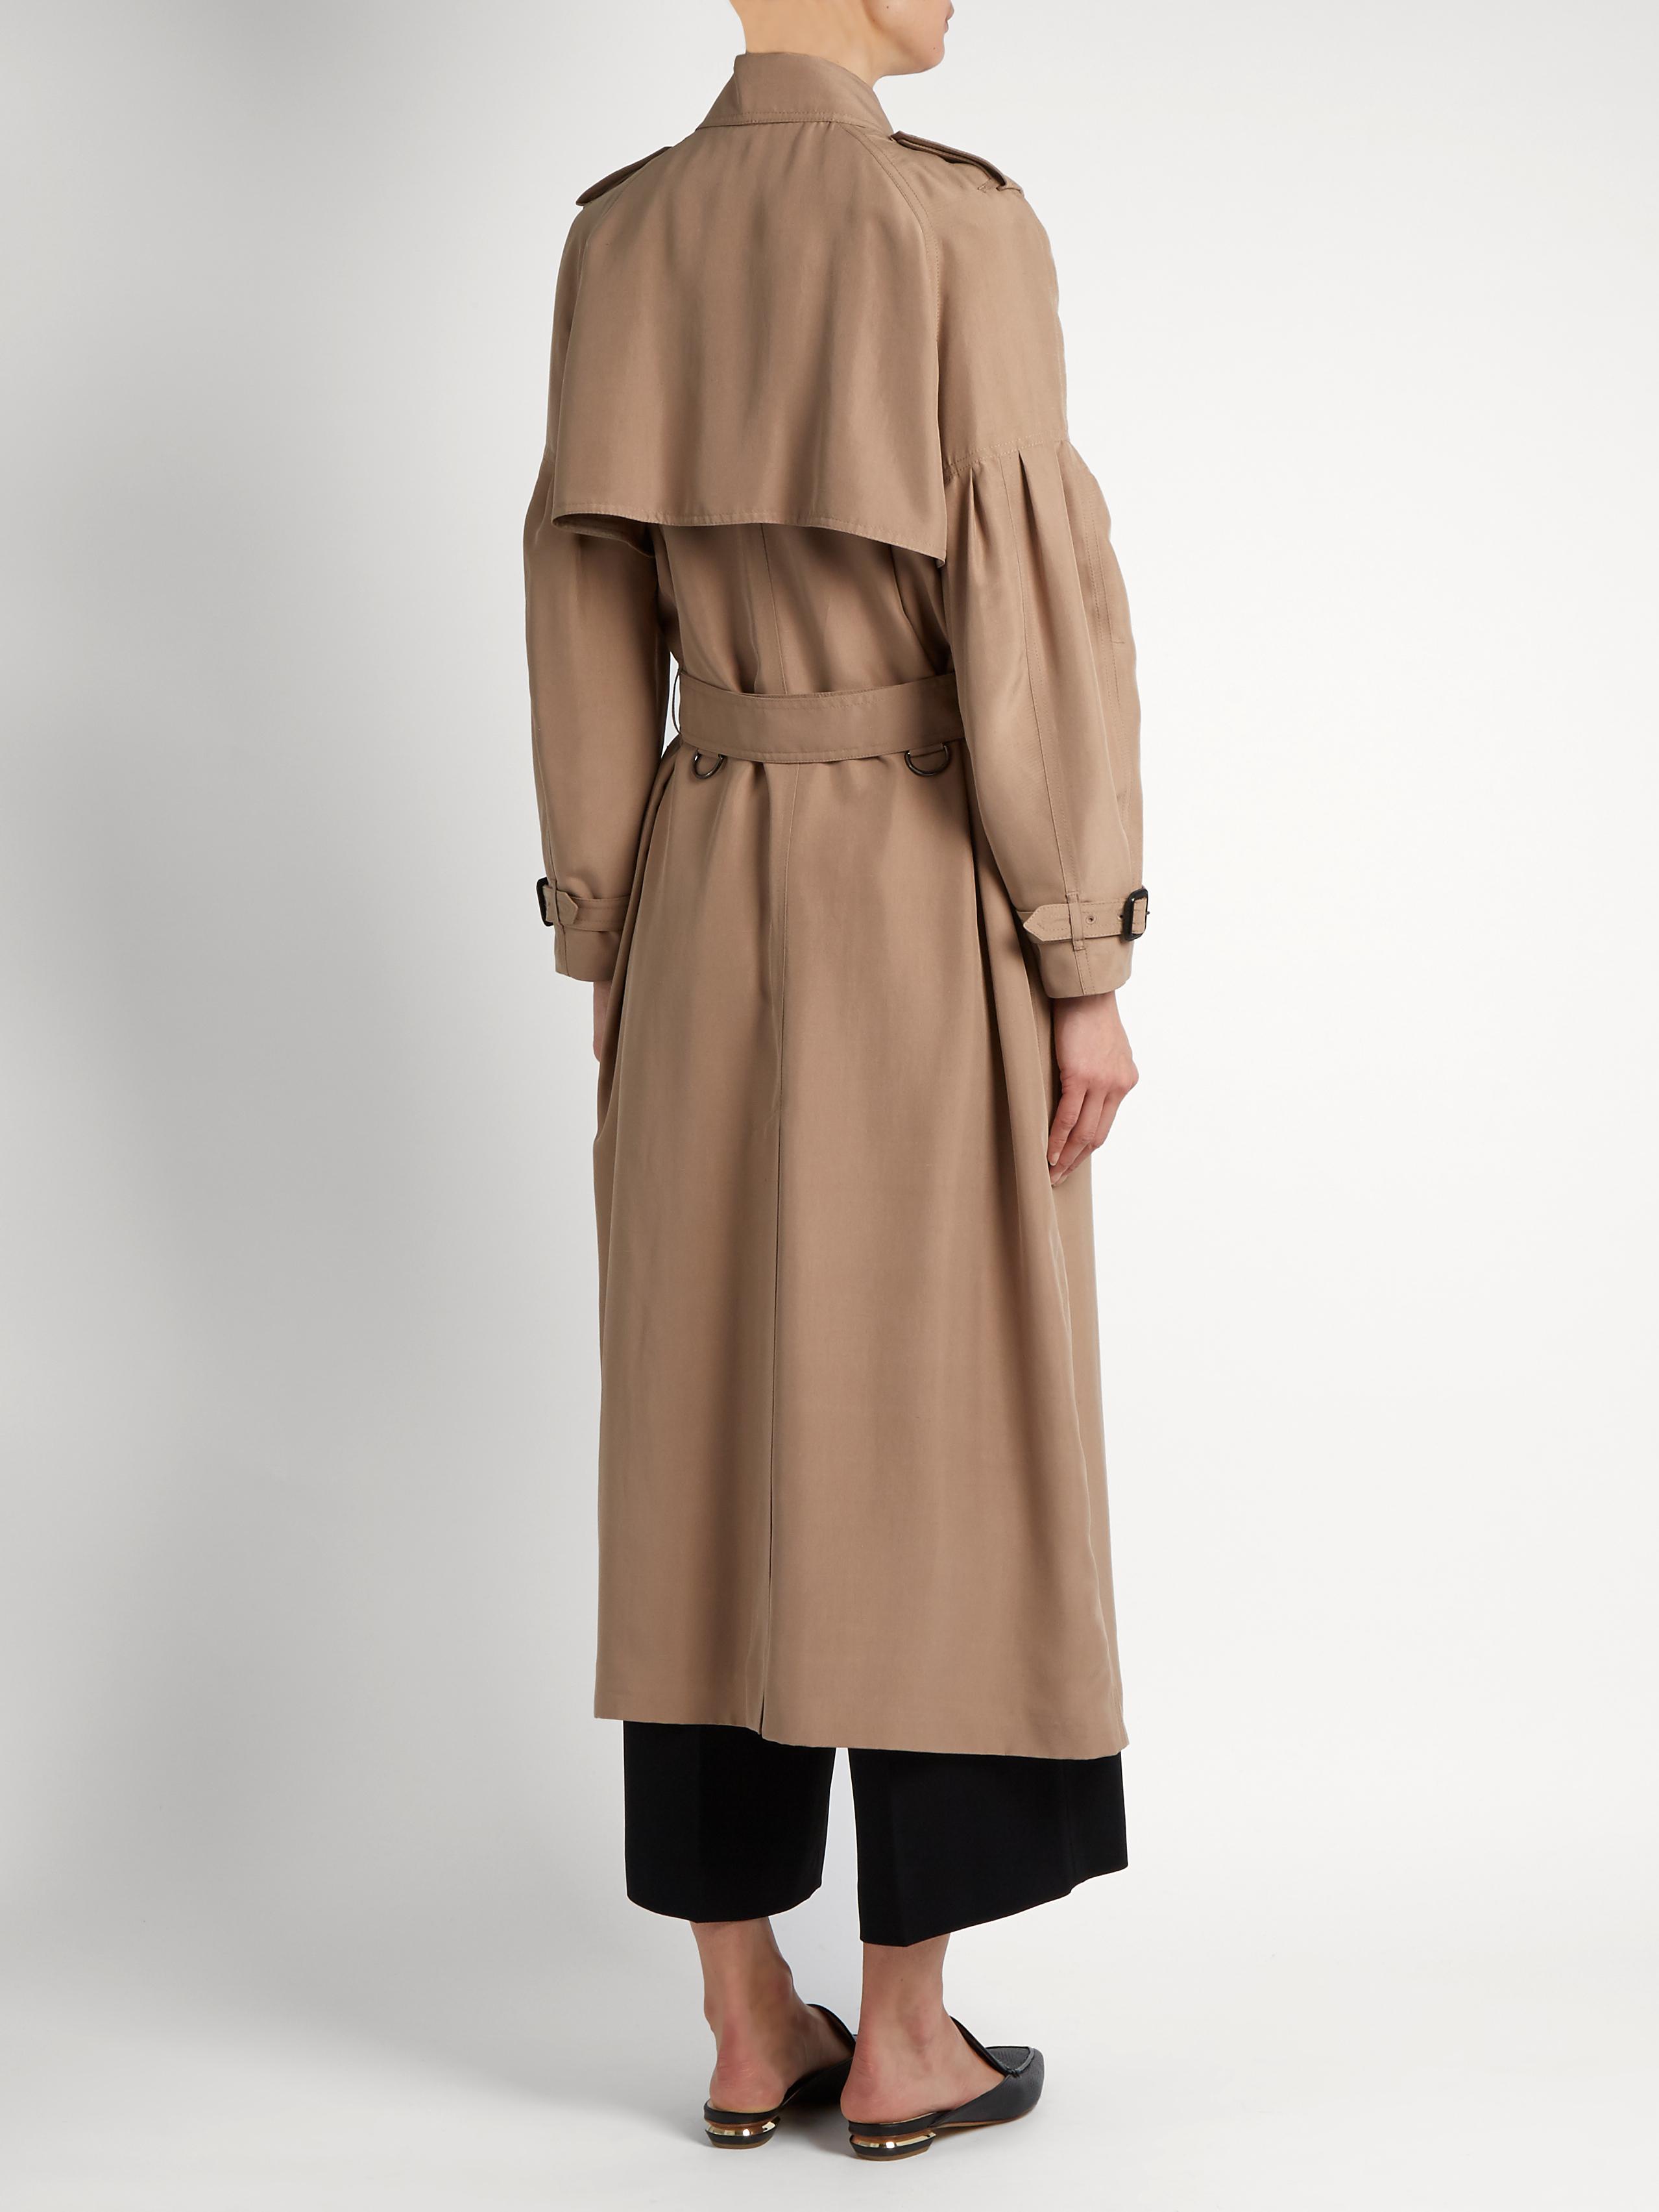 Lyst - Burberry Maythorne Mulberry-silk Trench Coat in Natural